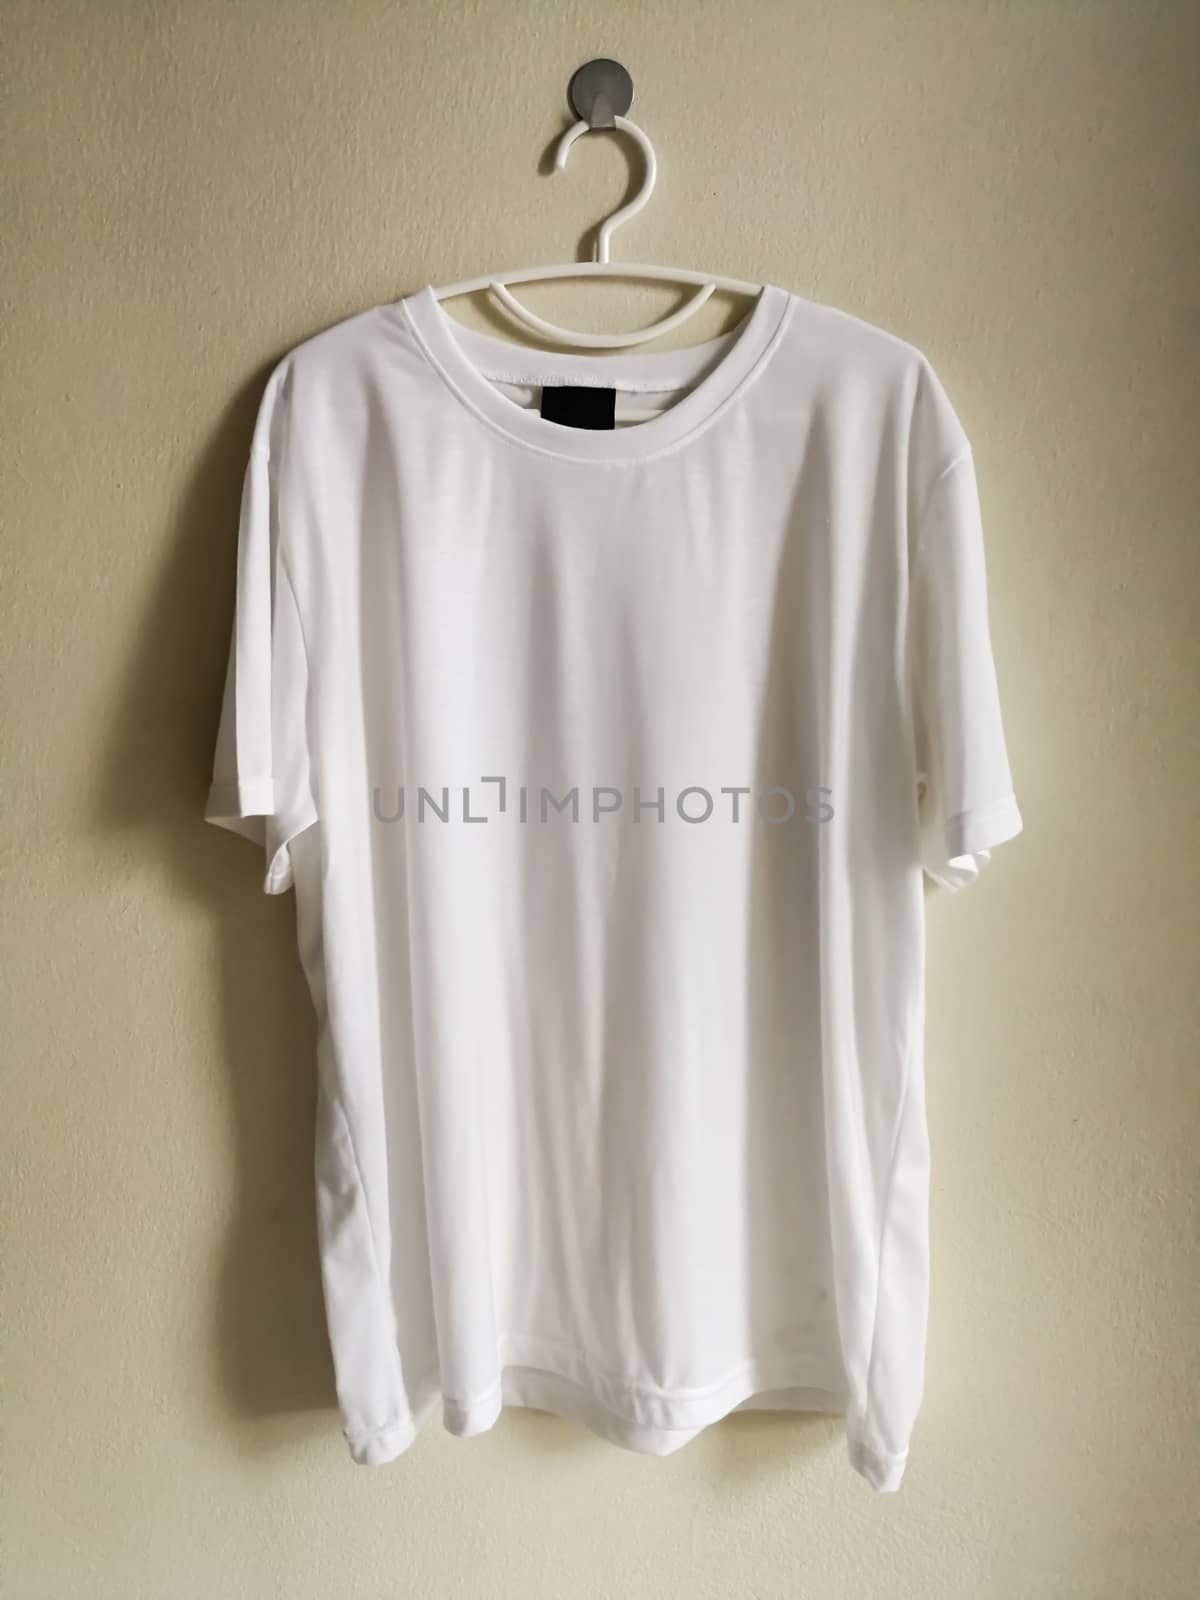 Blank t-shirt hanging on wall.